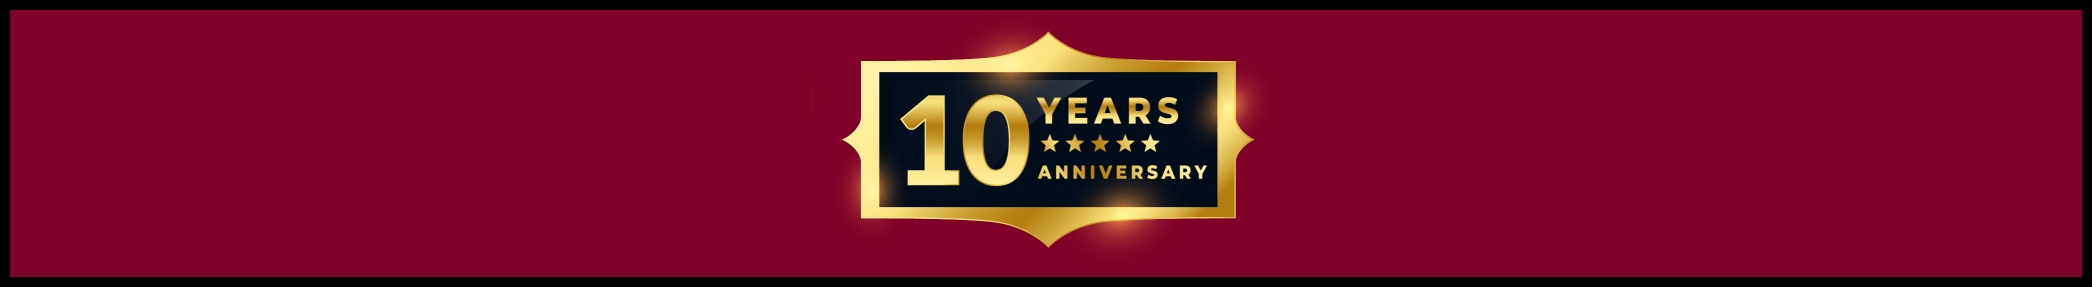 Cyber Defense Media Group Launches our 10th Anniversary Contest